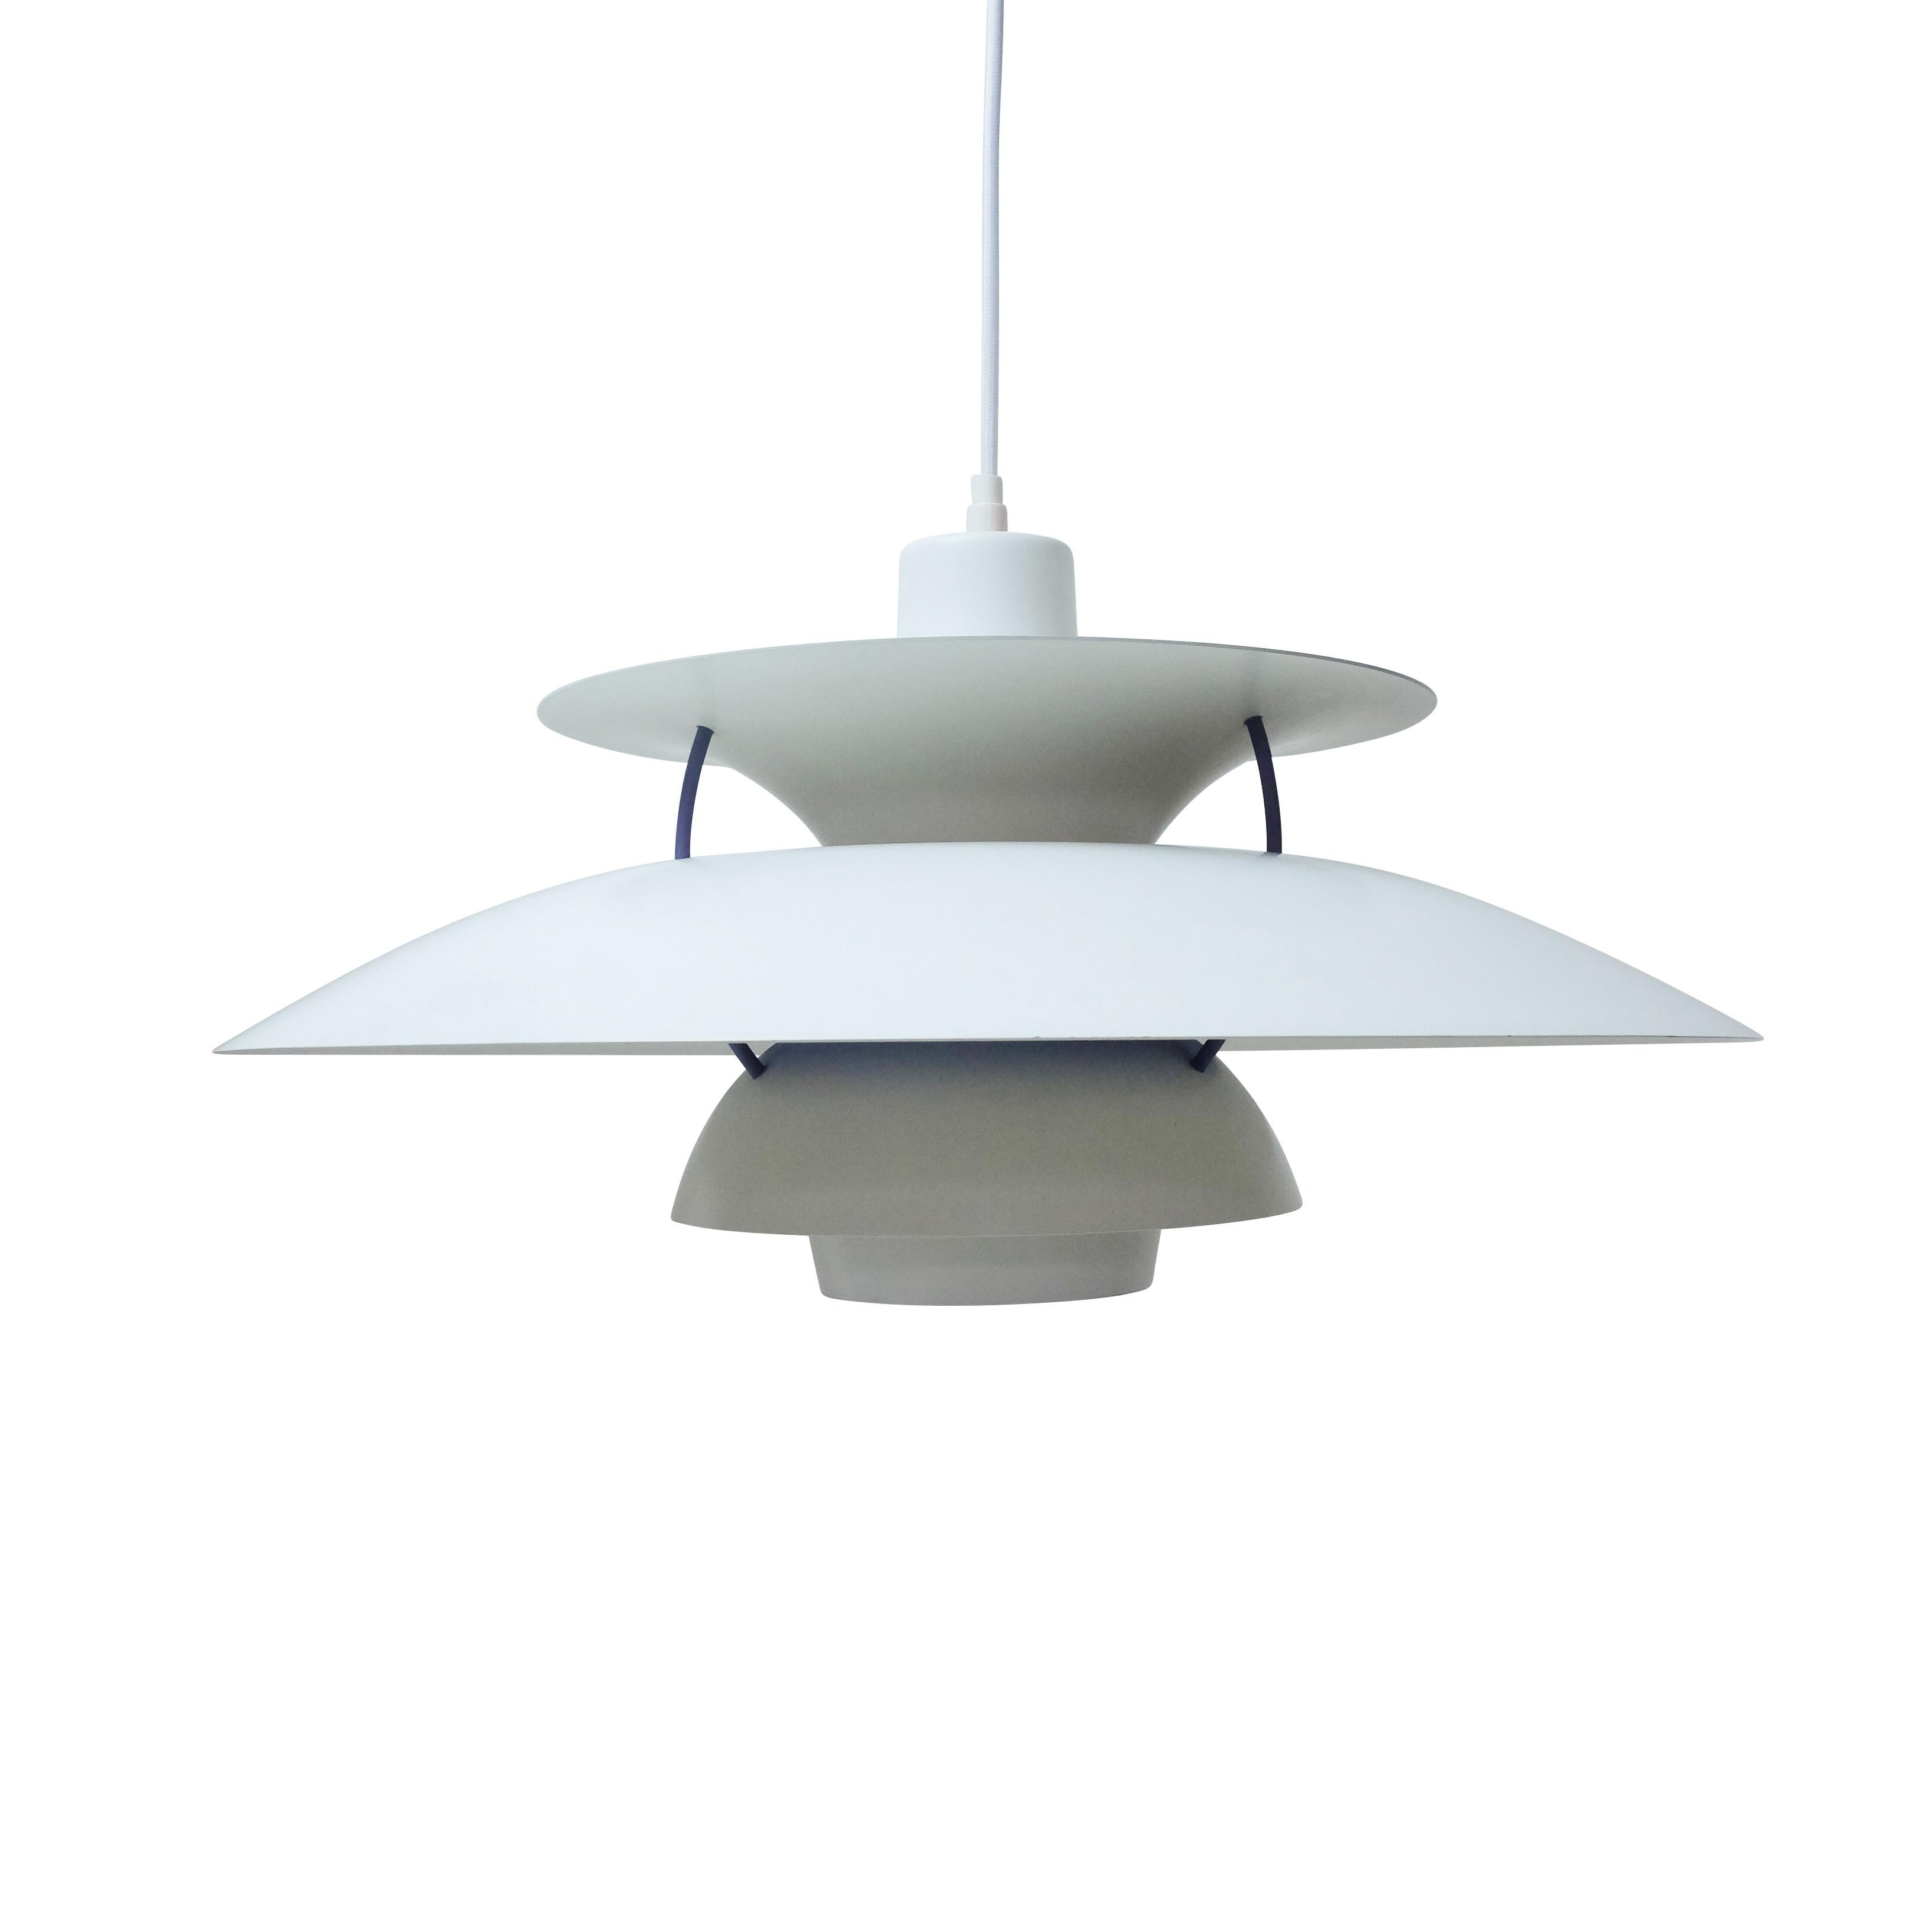 Vintage Poul Henningsen’s PH5 ceiling lamp produced by Louis Poulsen, Denmark.

This lamp is in very good condition, no scratches or noticeable signs of wear, it has been tested and provided with new cotton wiring.

Condition: Very